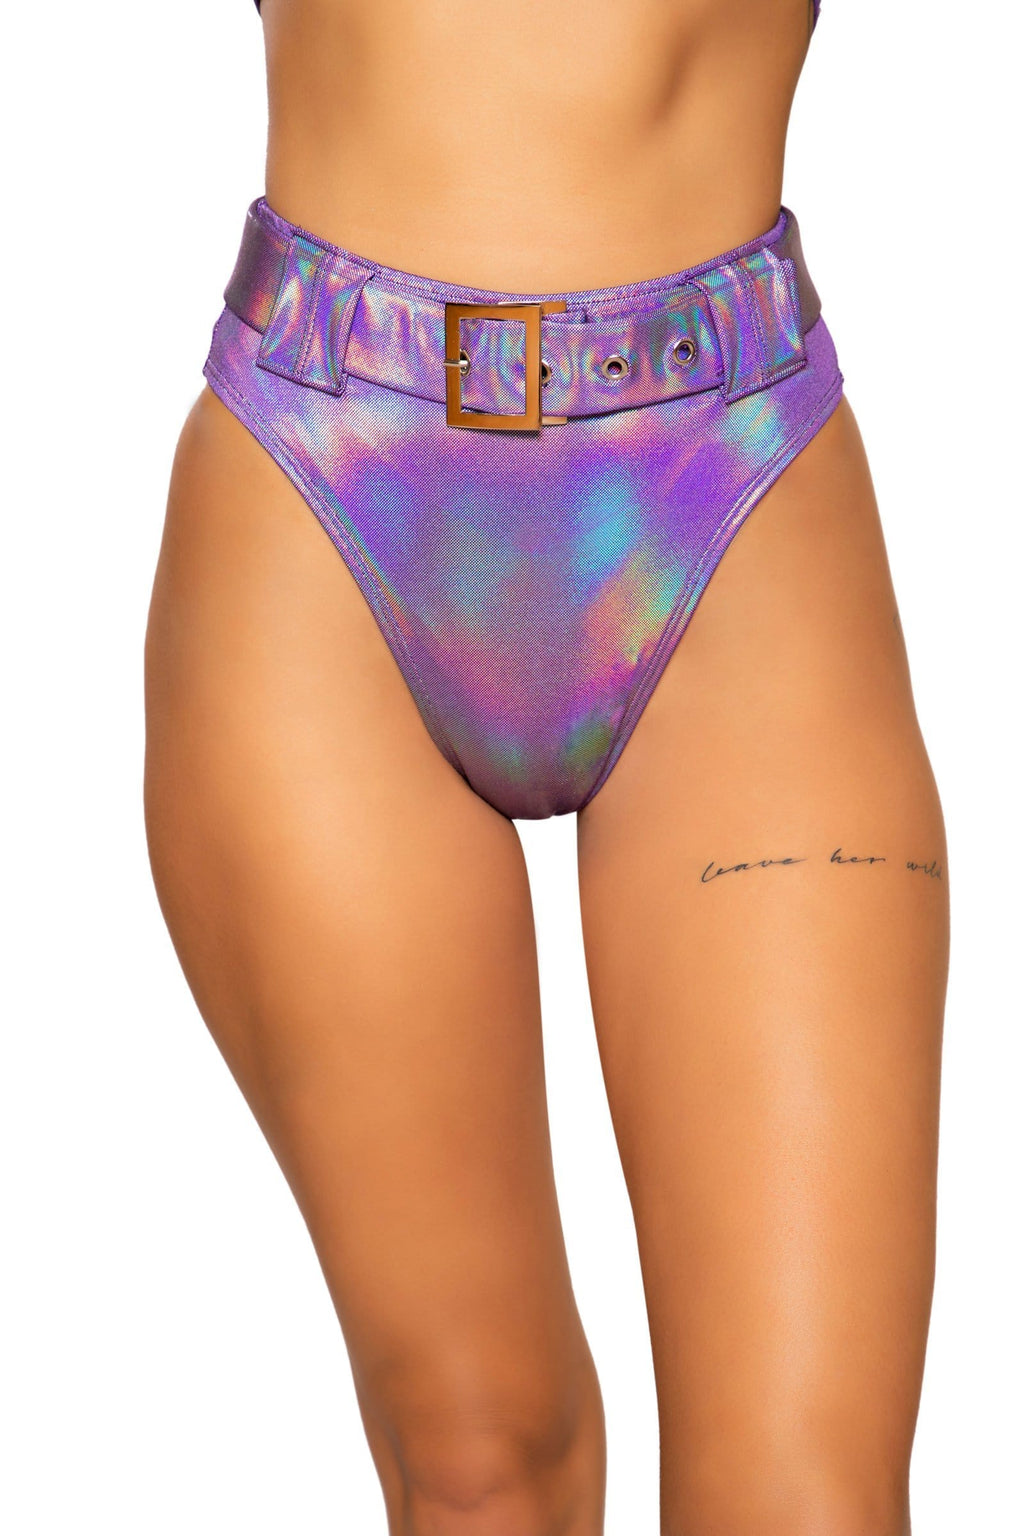 High-Waist Rave Booty Shorts with Belt